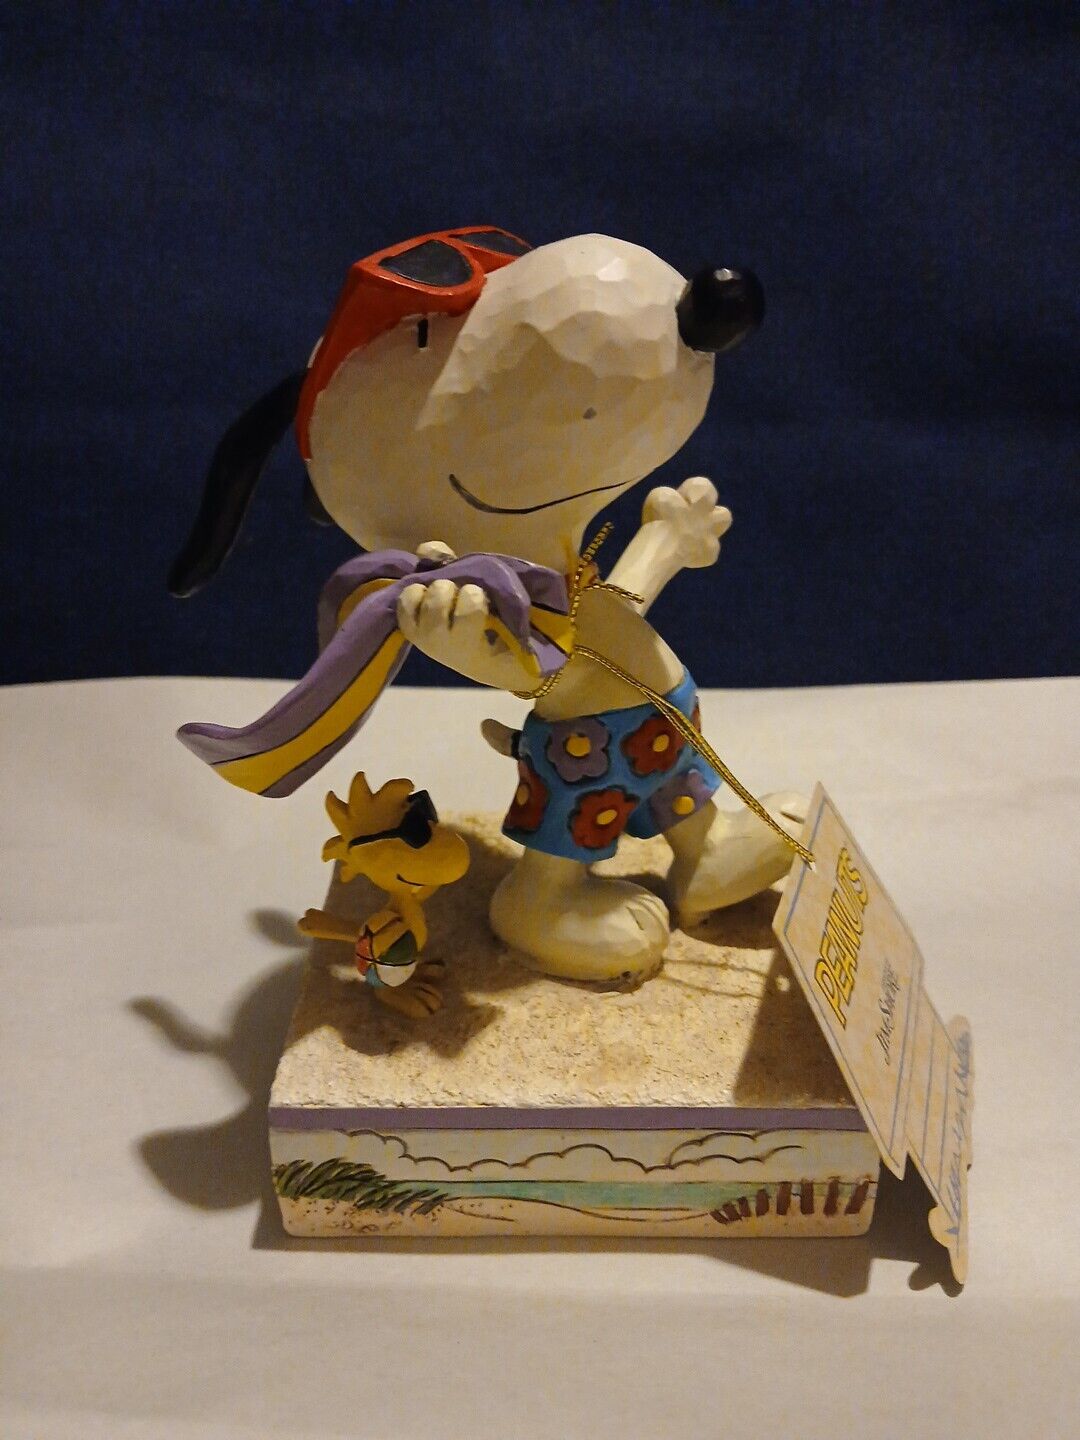 NEW-Jim Shore Peanuts: Snoopy & Woodstock At The Beach Figurine-- Summertime 